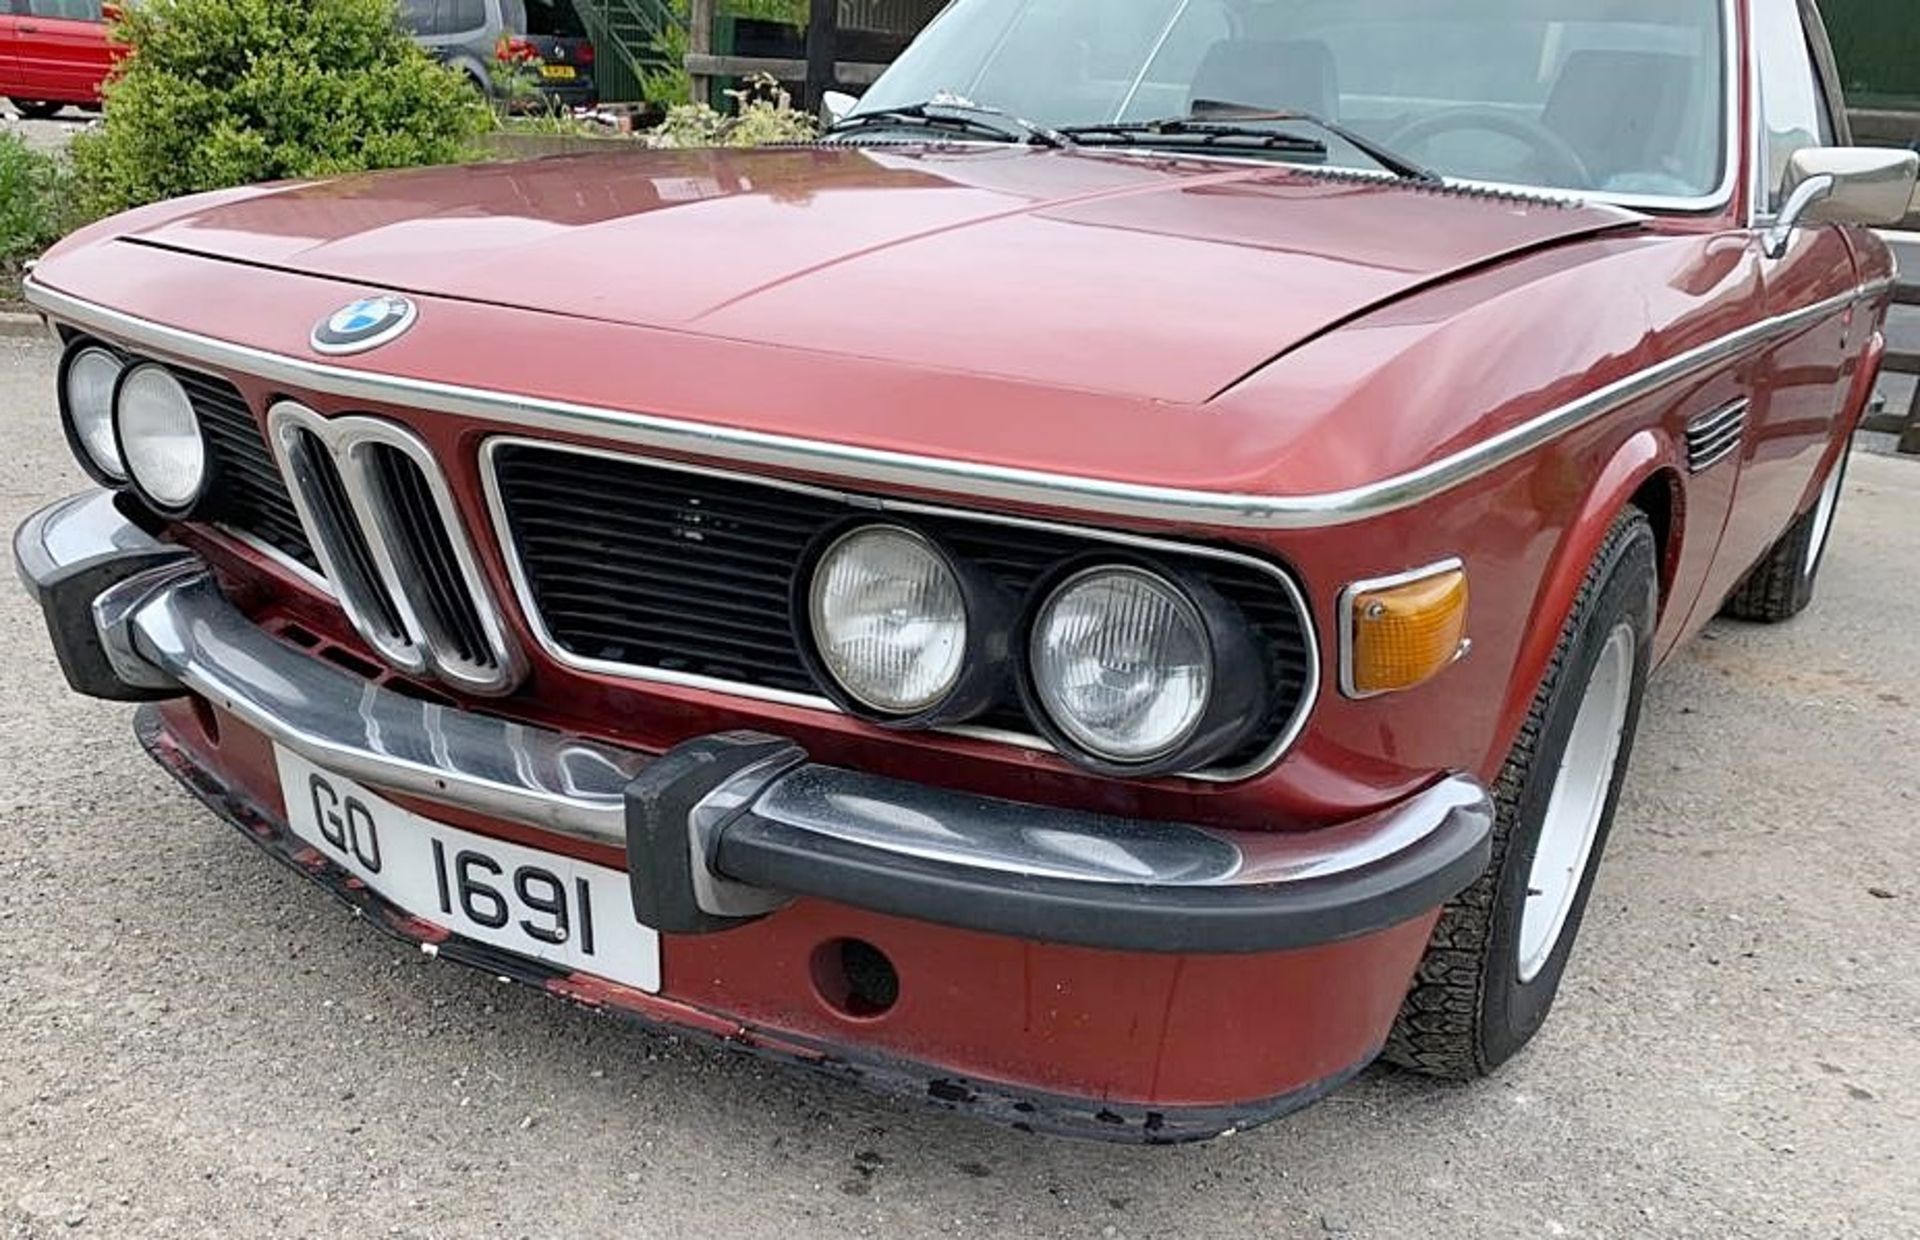 1 x BMW E9 2500 CSA Classic Car - Ultra Rare Example - CL022 - Location: Wilmslow, Cheshire - Image 9 of 29